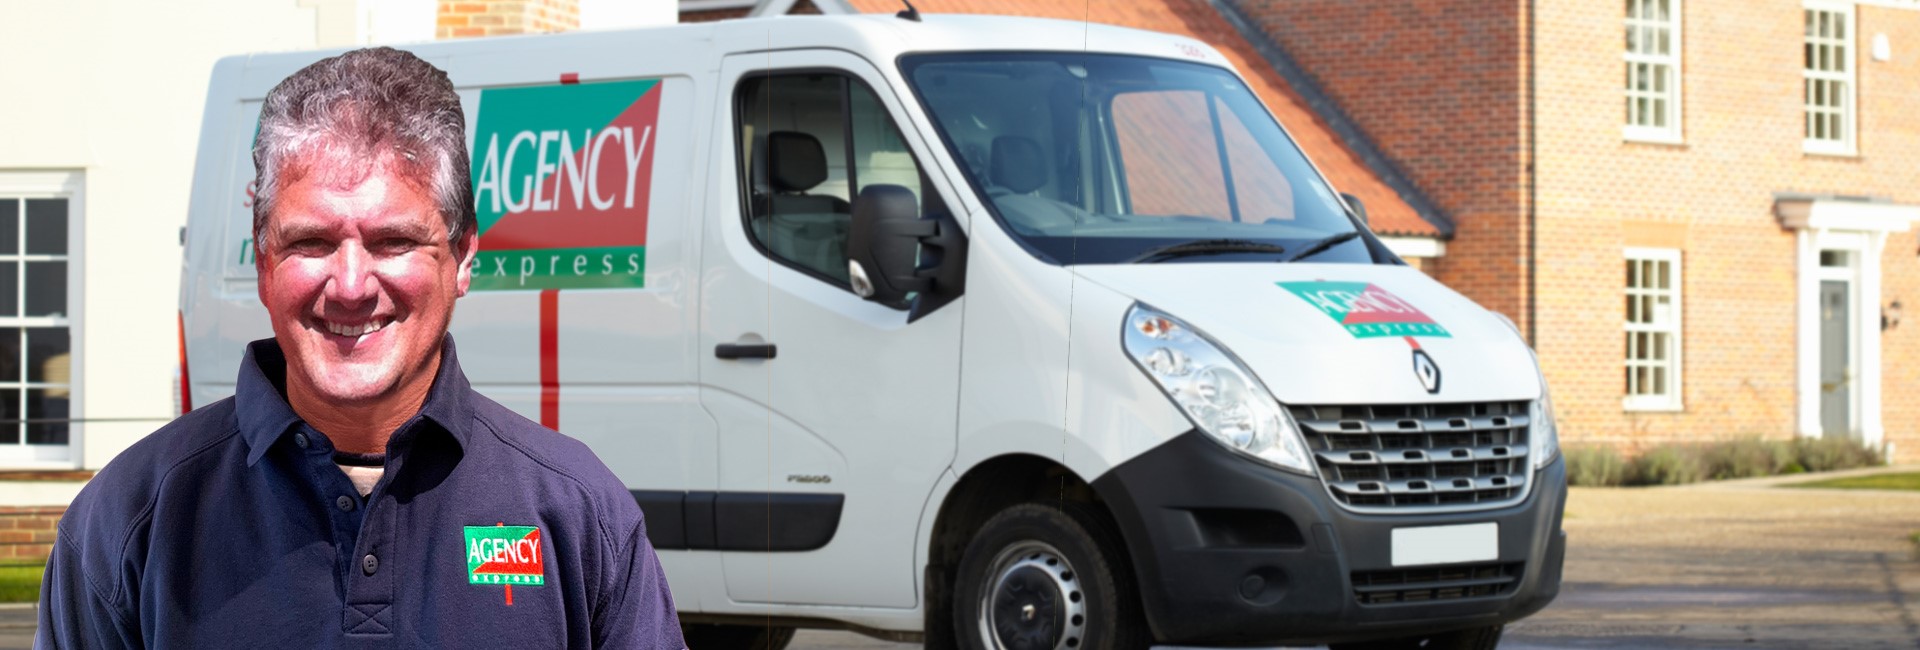 Agency Express case study. Franchisee Martin Shuker with van.